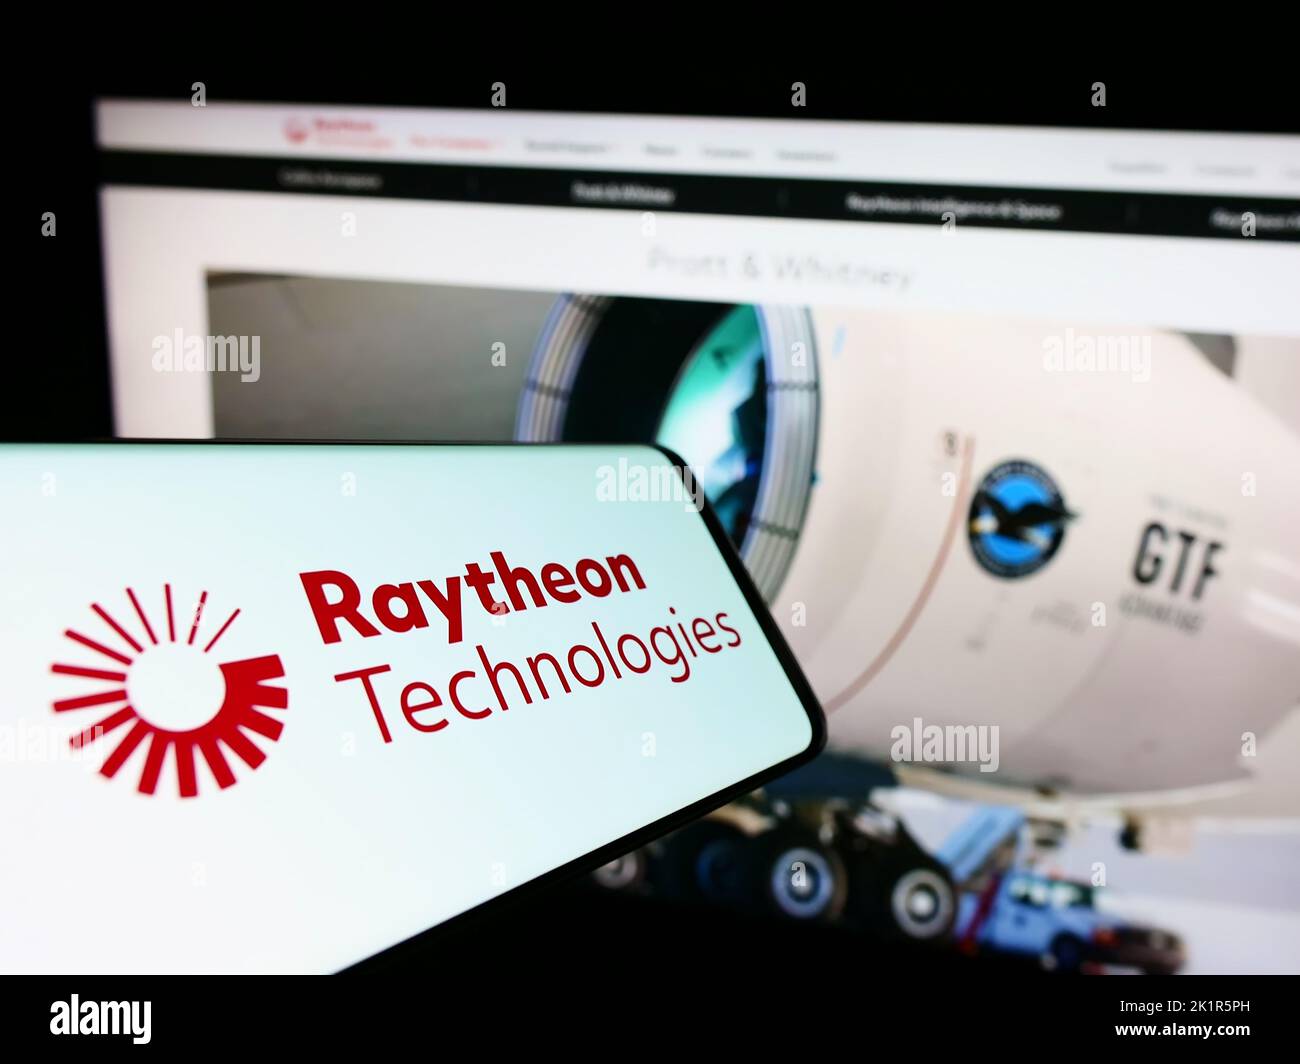 Cellphone with logo of US company Raytheon Technologies Corporation on screen in front of website. Focus on center-right of phone display. Stock Photo